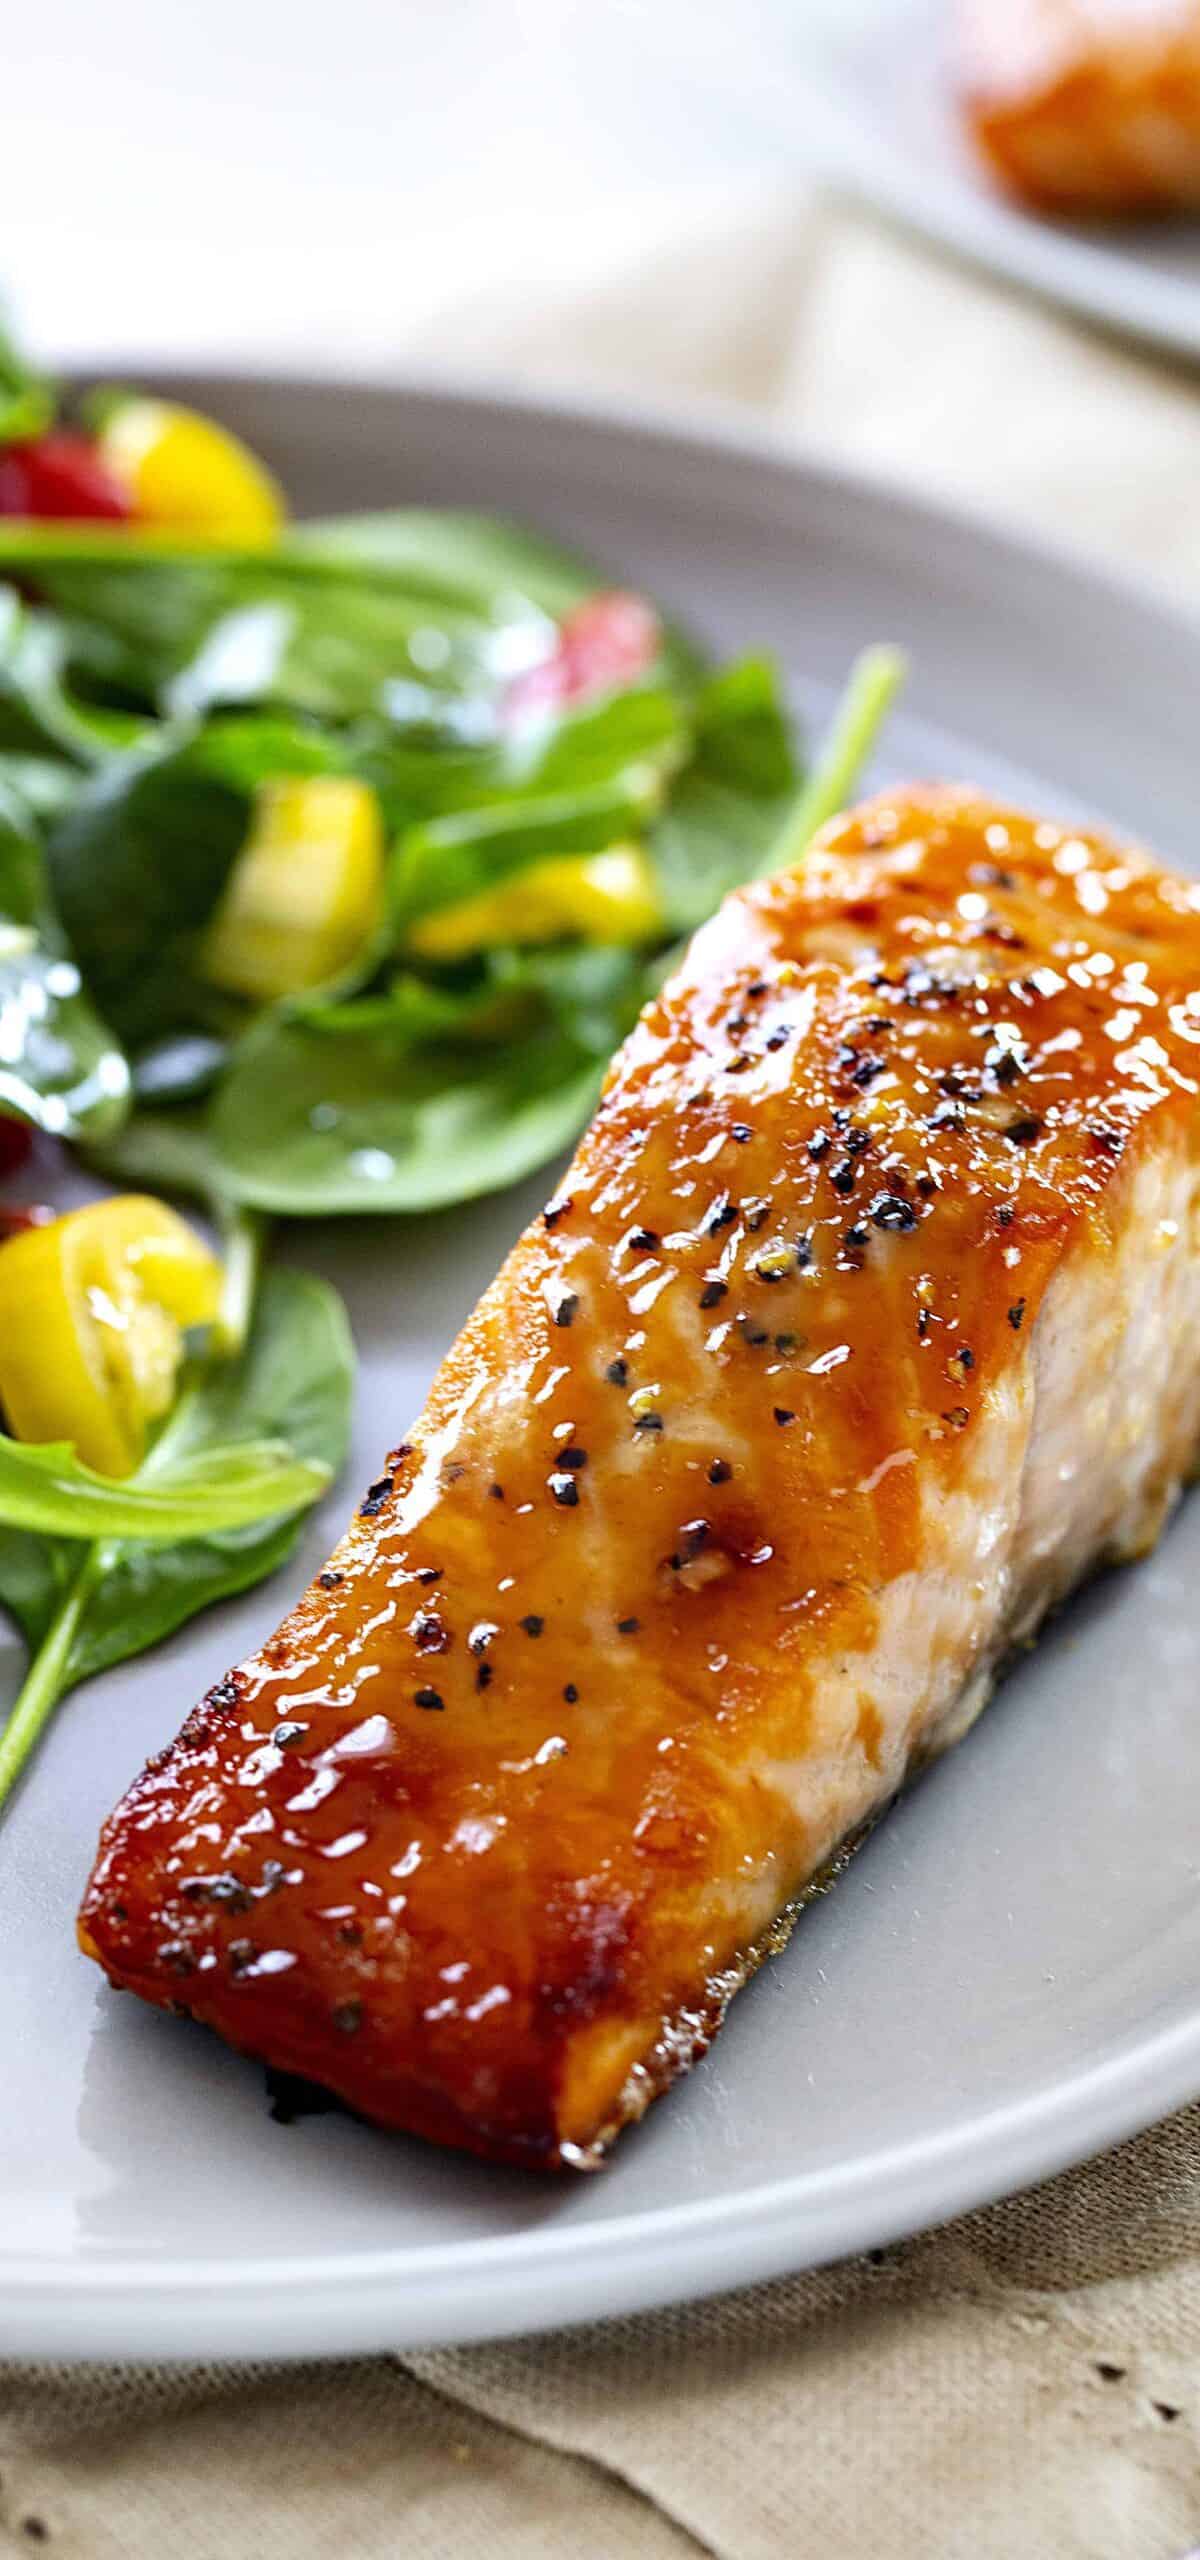  Sweet and tangy: Salmon glazed with mustard and brown sugar